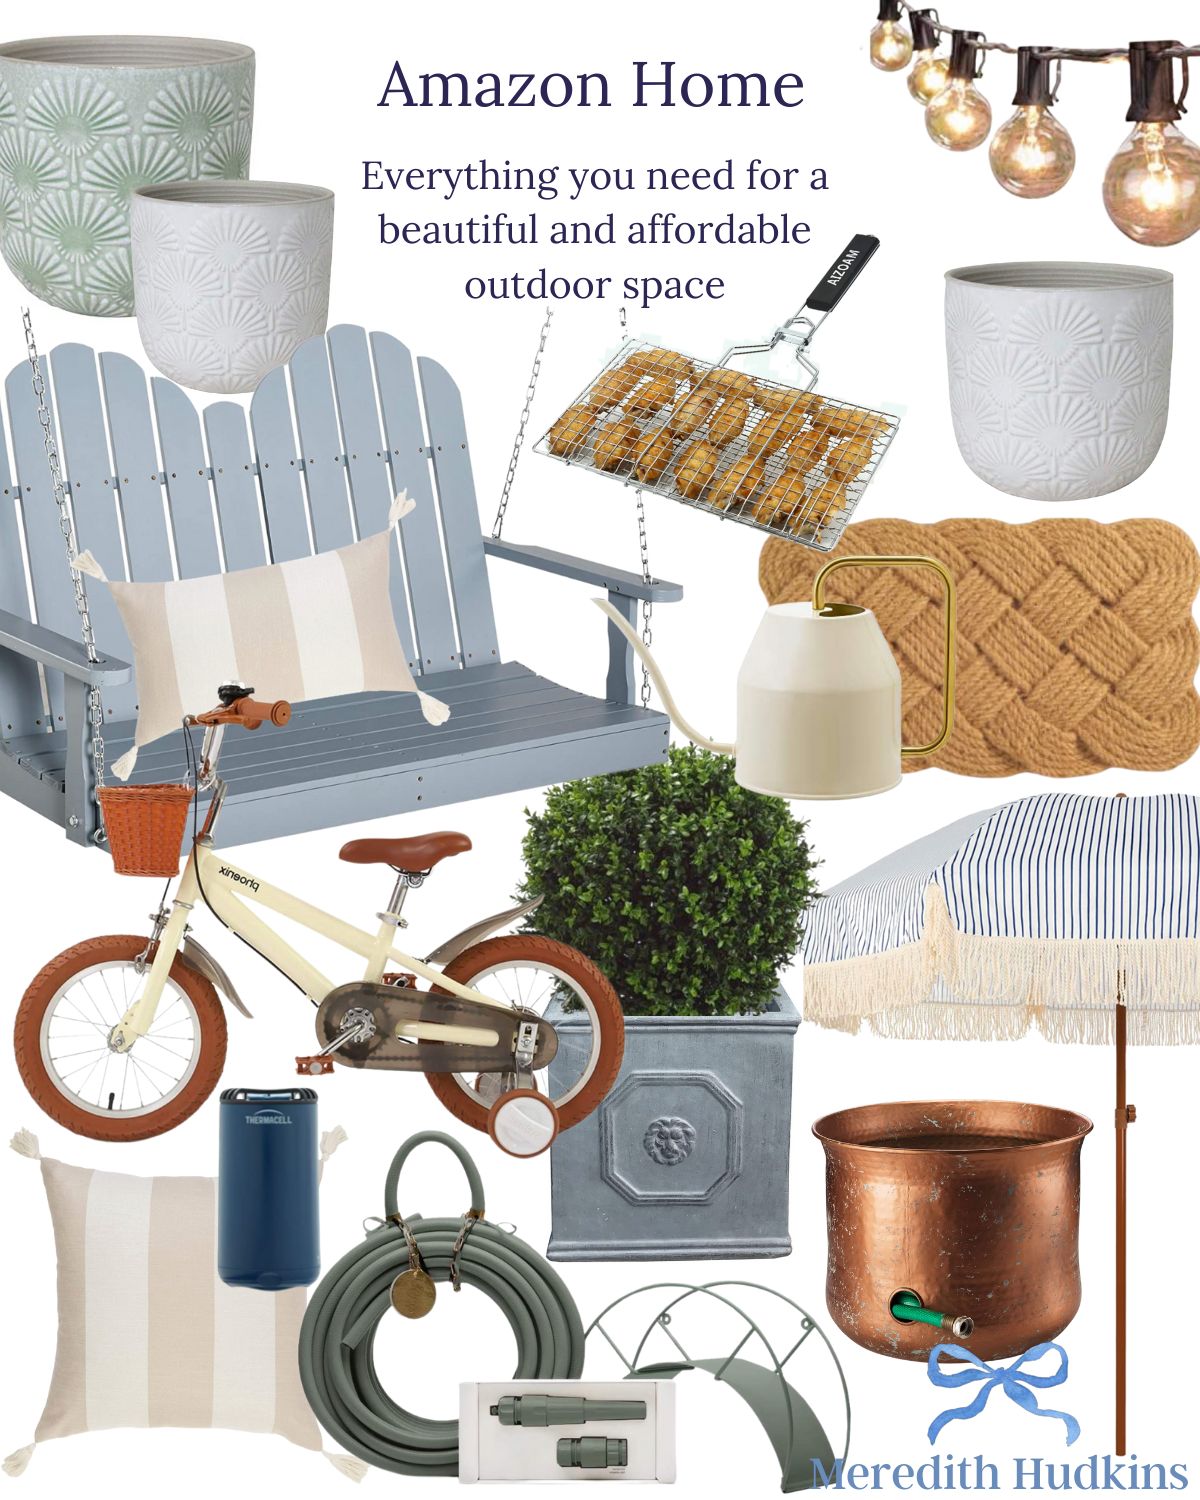 Adorable outdoor finds for a quaint classic and comfortable space. Soft sage greens and dusty blues  | Amazon (US)